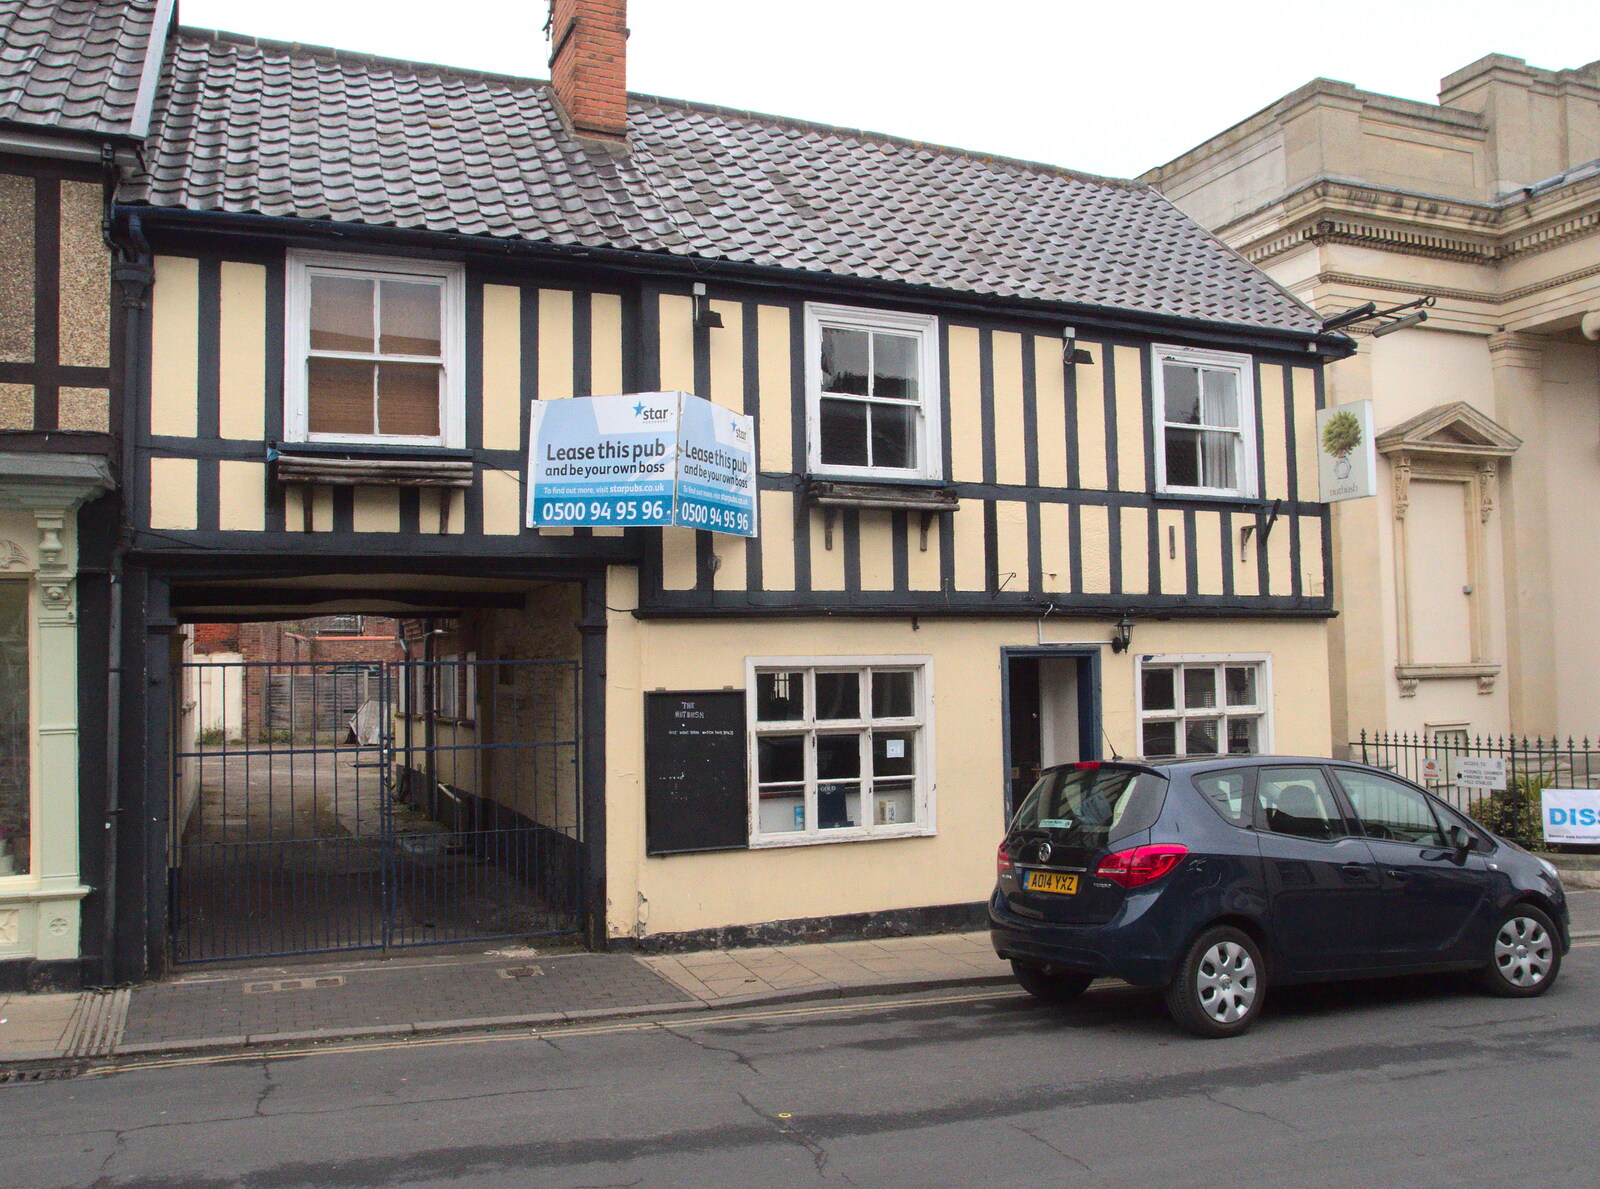 The former Two Brewers/Nutbush is up for lease from The Last Day of Pre-School and Beer at the Trowel and Hammer, Cotton, Suffolk - 29th March 2015